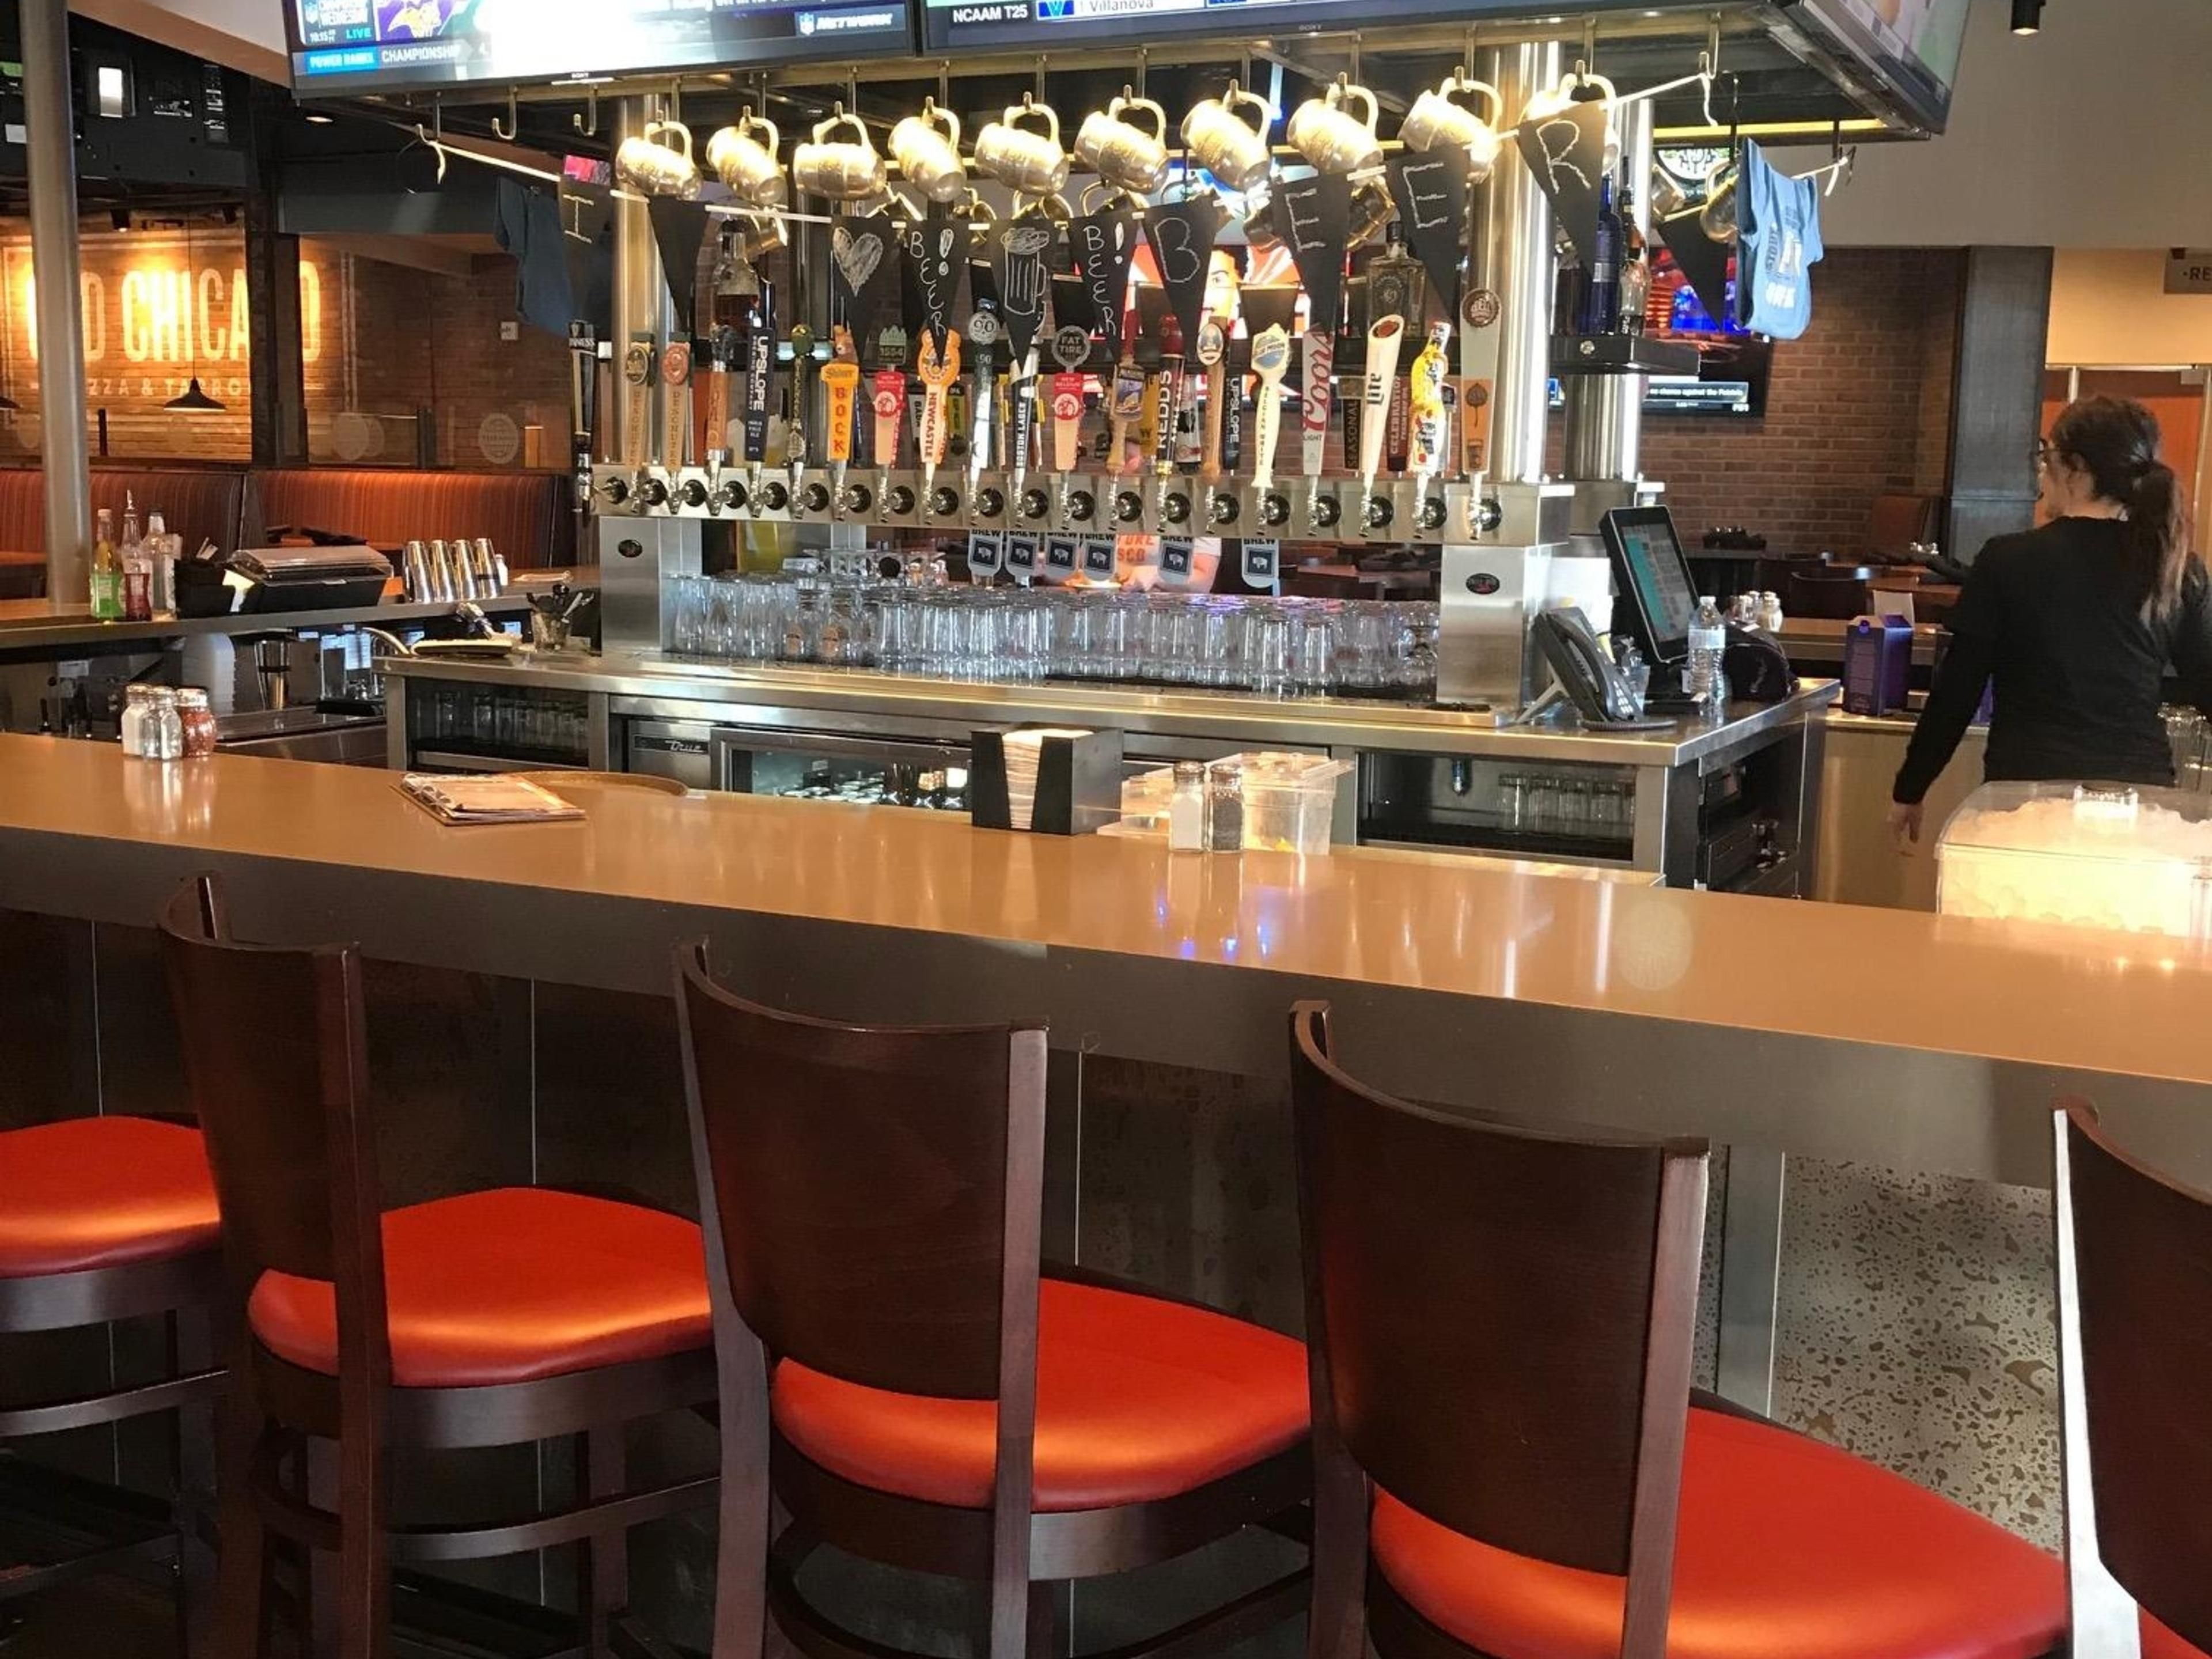 Old Chicago Pizza and Taproom is the perfect place to enjoy a wonderful meal and cold refreshing drink. Old Chicago serves breakfast, lunch, and dinner along with an extensive beer menu. Enjoy Happy Hour from 4pm to 6pm each day. We offer an extended beer menu for you to enjoy.